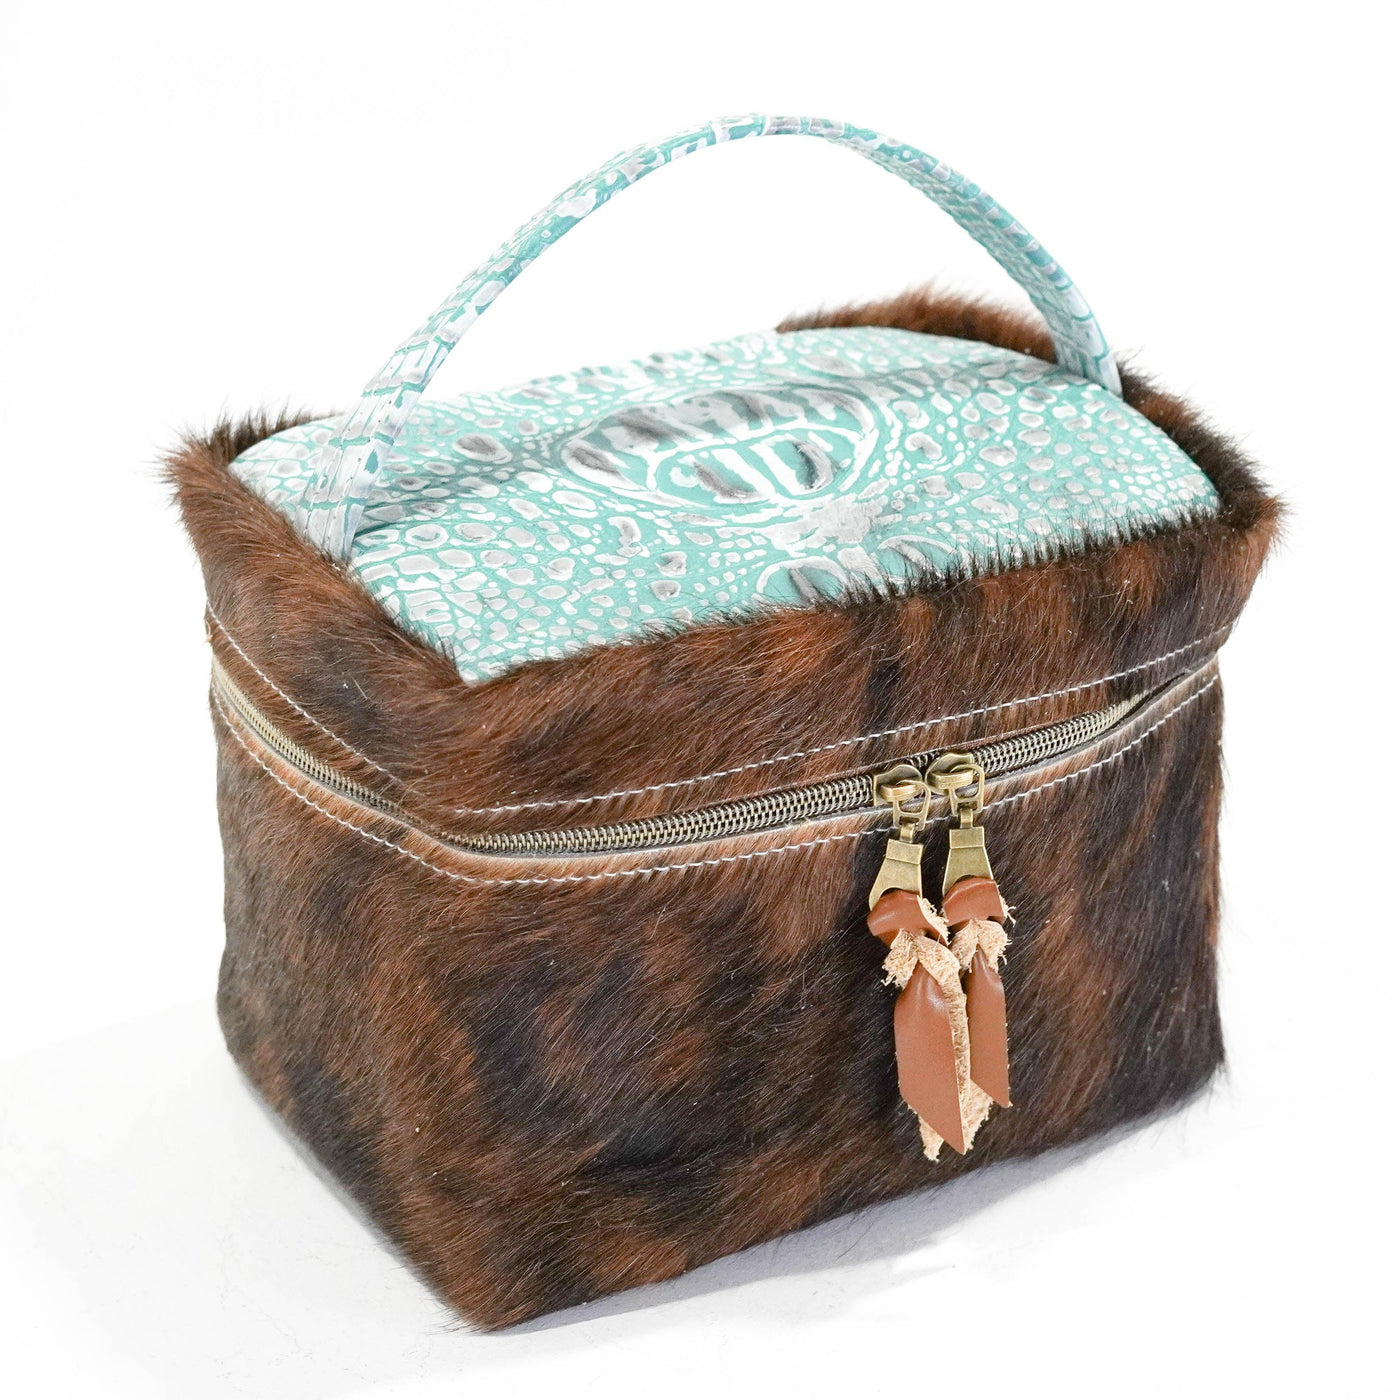 Caboose - Dark Brindle w/ Turquoise Sand Croc-Caboose-Western-Cowhide-Bags-Handmade-Products-Gifts-Dancing Cactus Designs